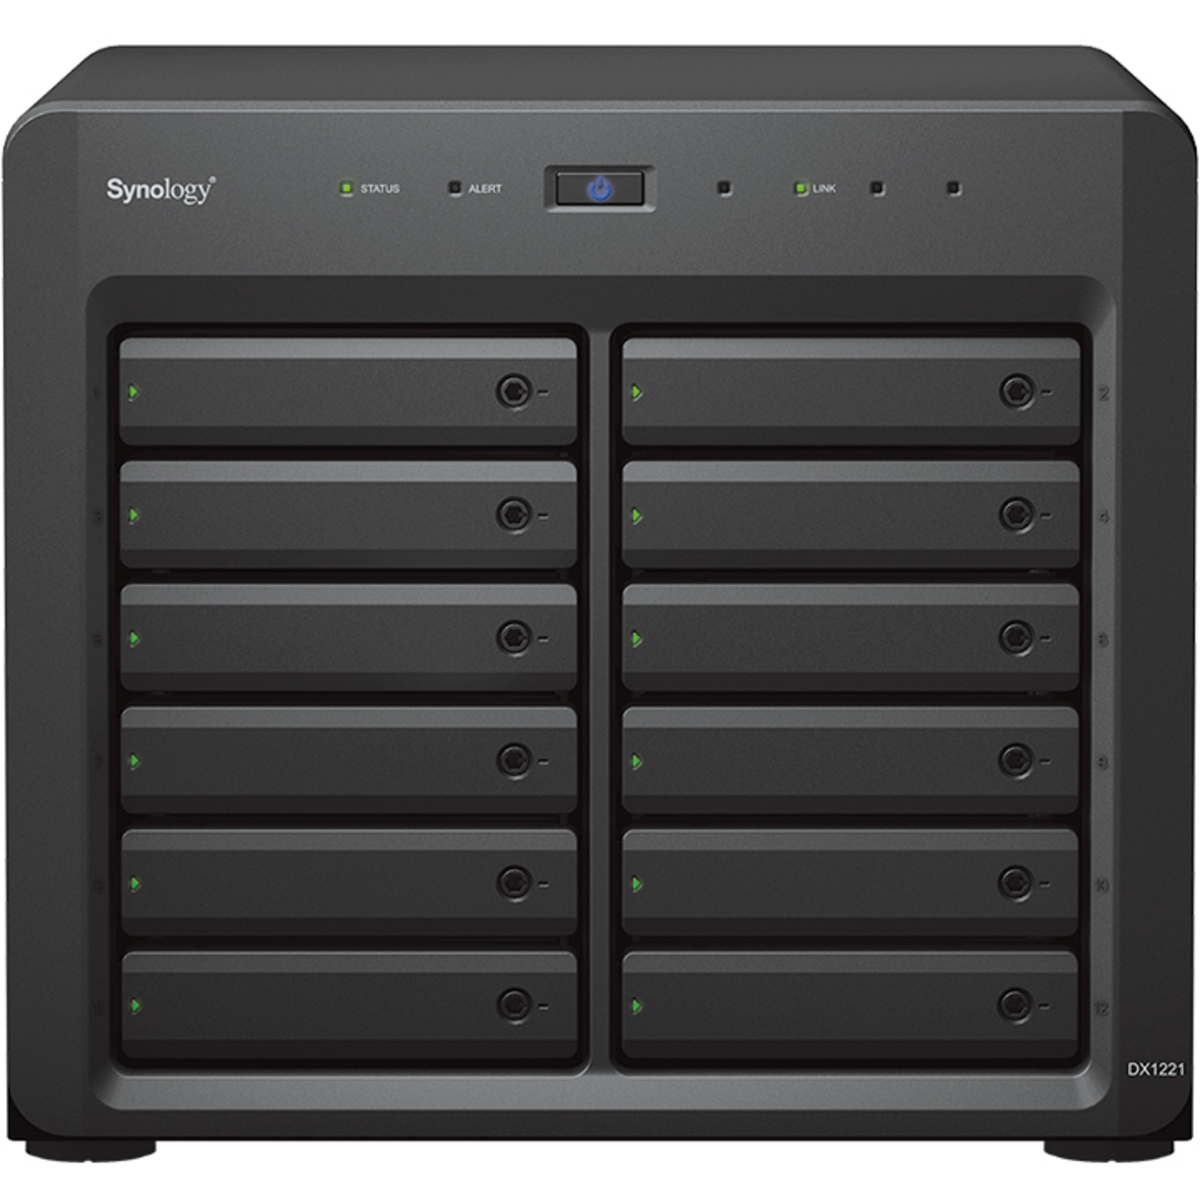 buy Synology DX1222 Desktop Expansion Enclosure Burn-In Tested Configurations - nas headquarters buy network attached storage server device das new raid-5 free shipping usa DX1222